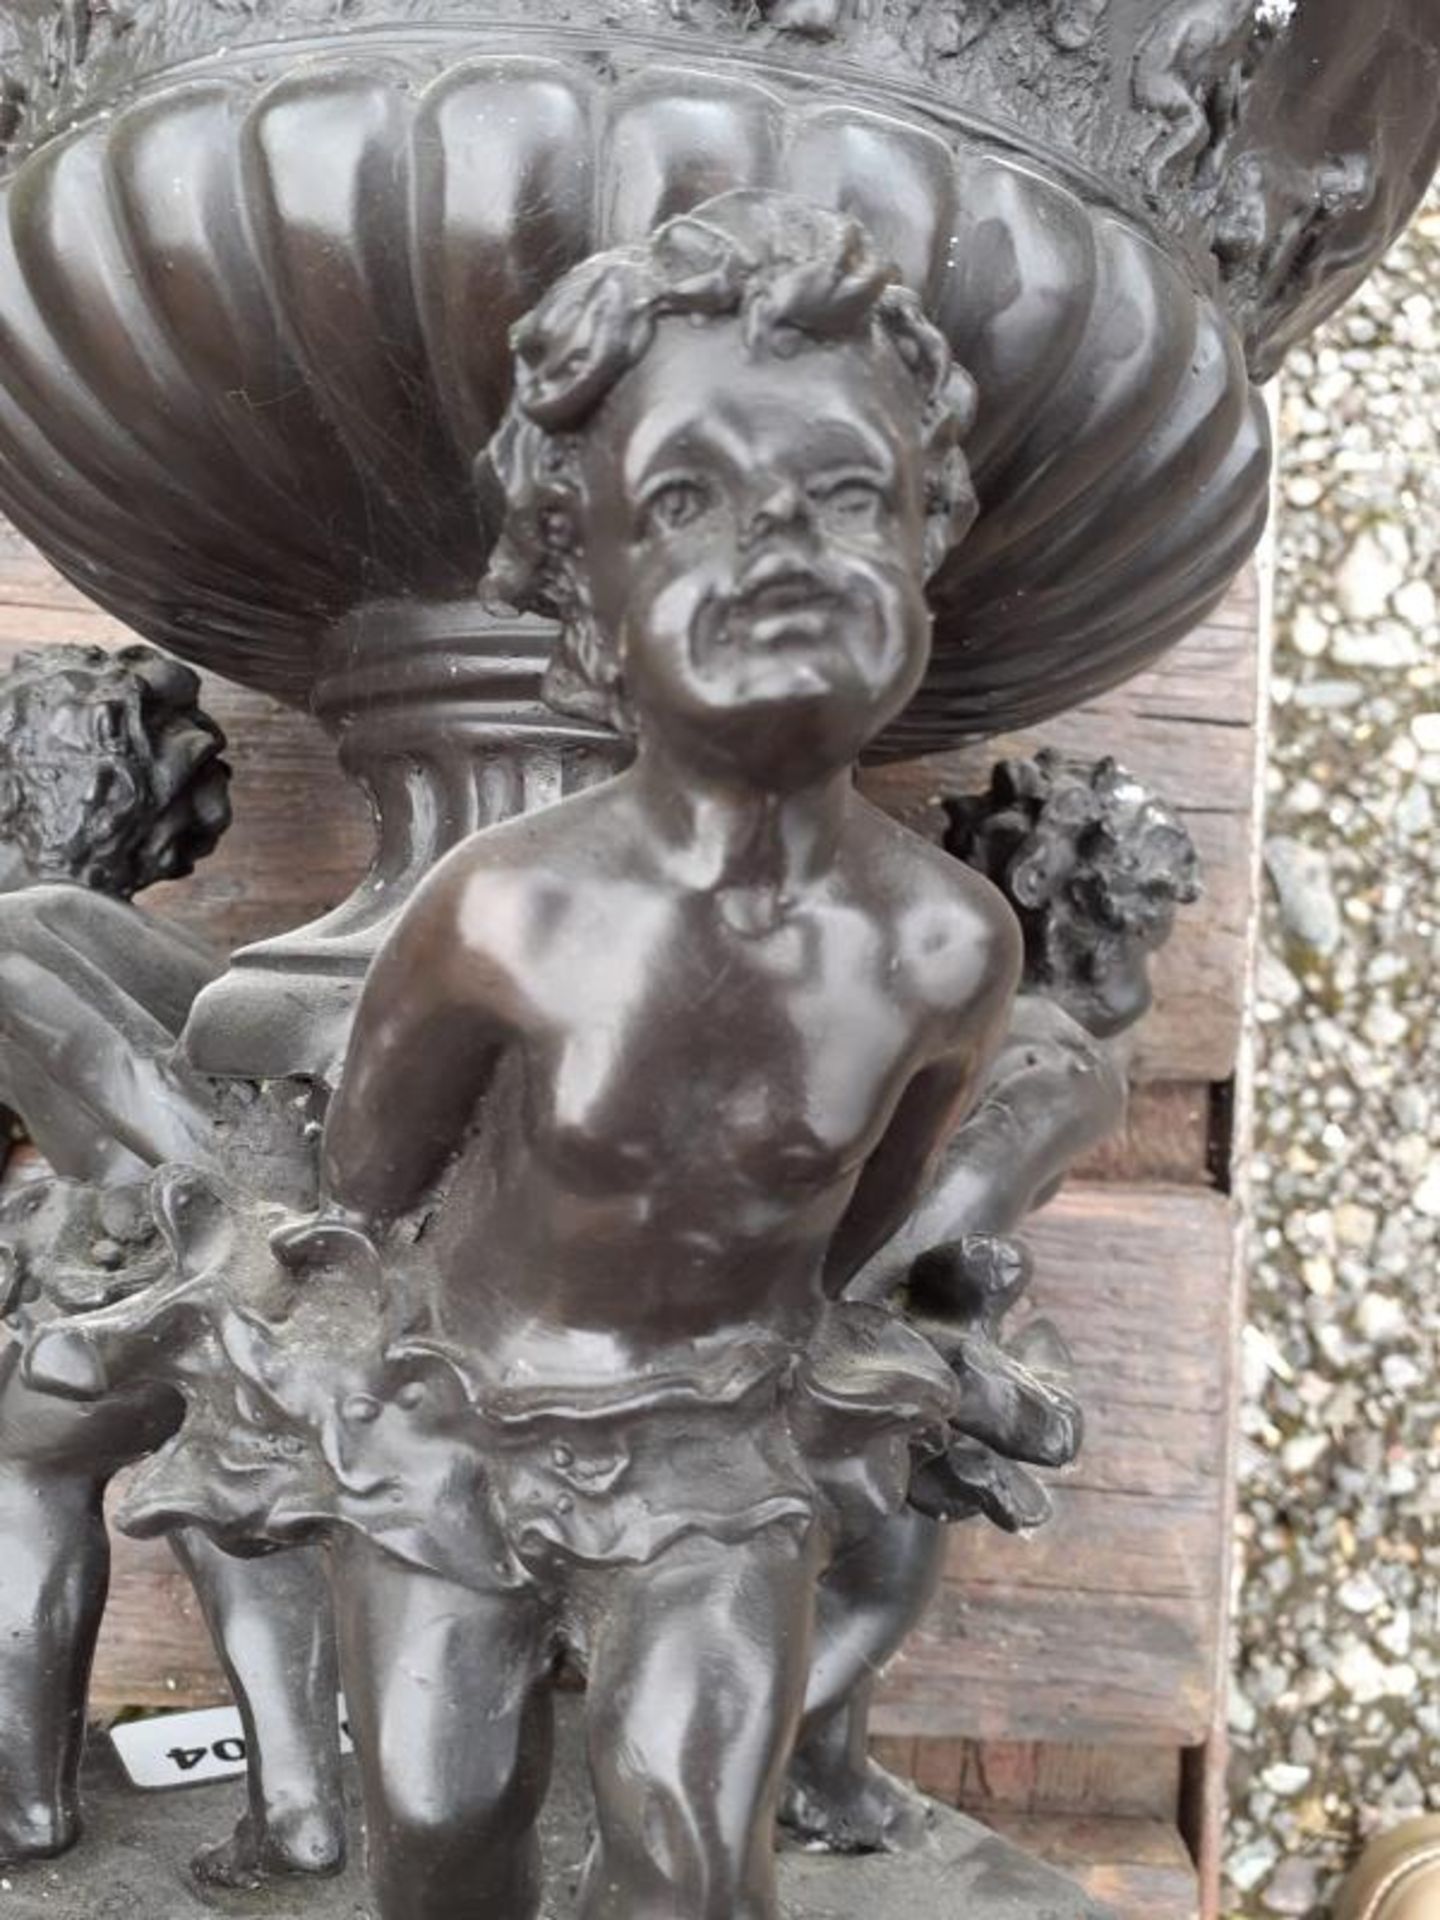 1 x Large Table Statue / Sculpture Of 3 Cherubs Carrying A Planter In Black Metal With Marble / Gran - Image 7 of 10